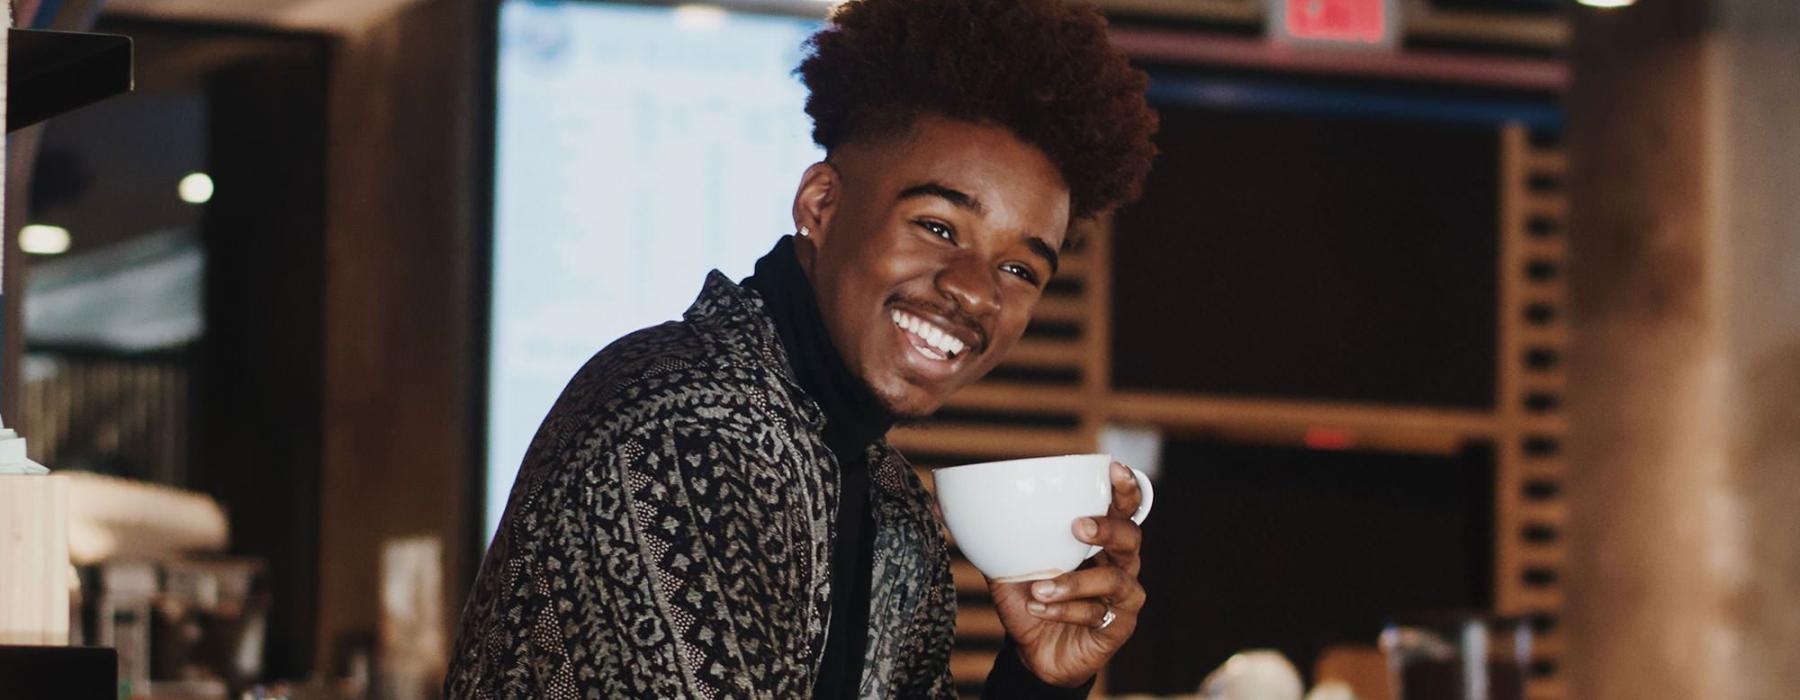 young man smiles while holding a cup of coffee in coffee shop